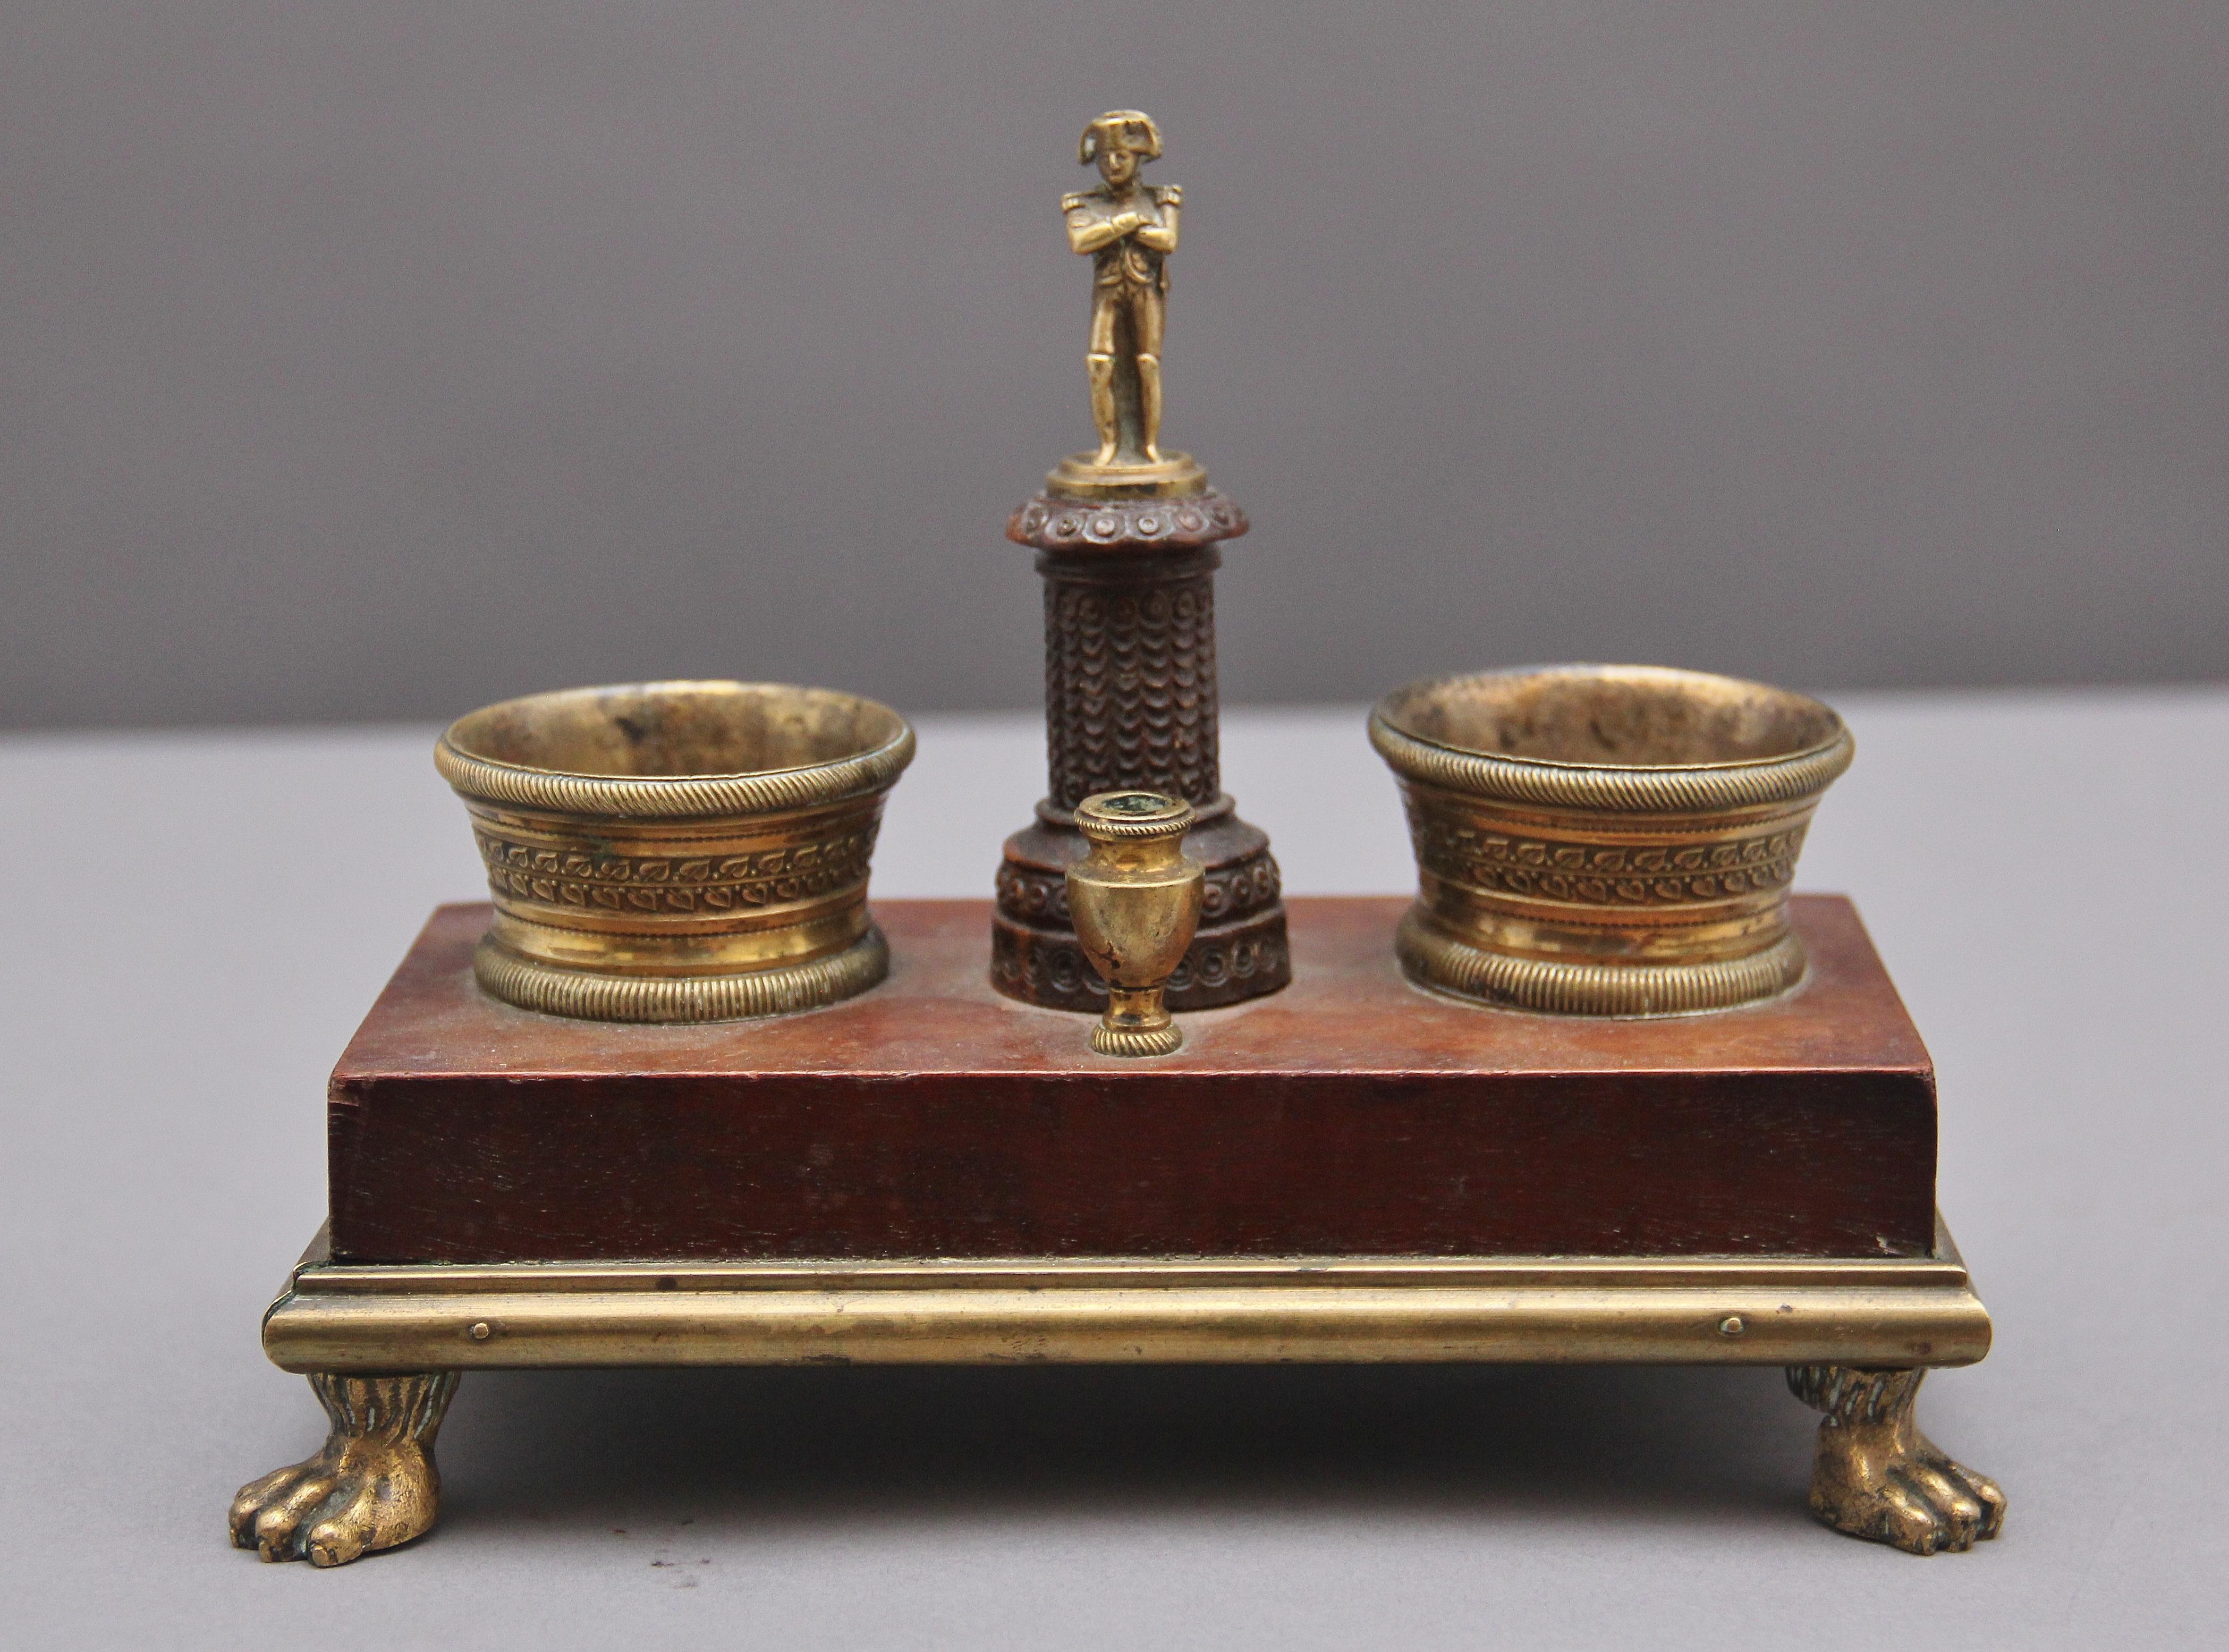 A lovely 19th Century French ormolu and mahogany desk set on ormolu claw feet, there are two ink well holders and a pen holder, in the centre is a carved wood column holding Napoleon. circa 1820.
 